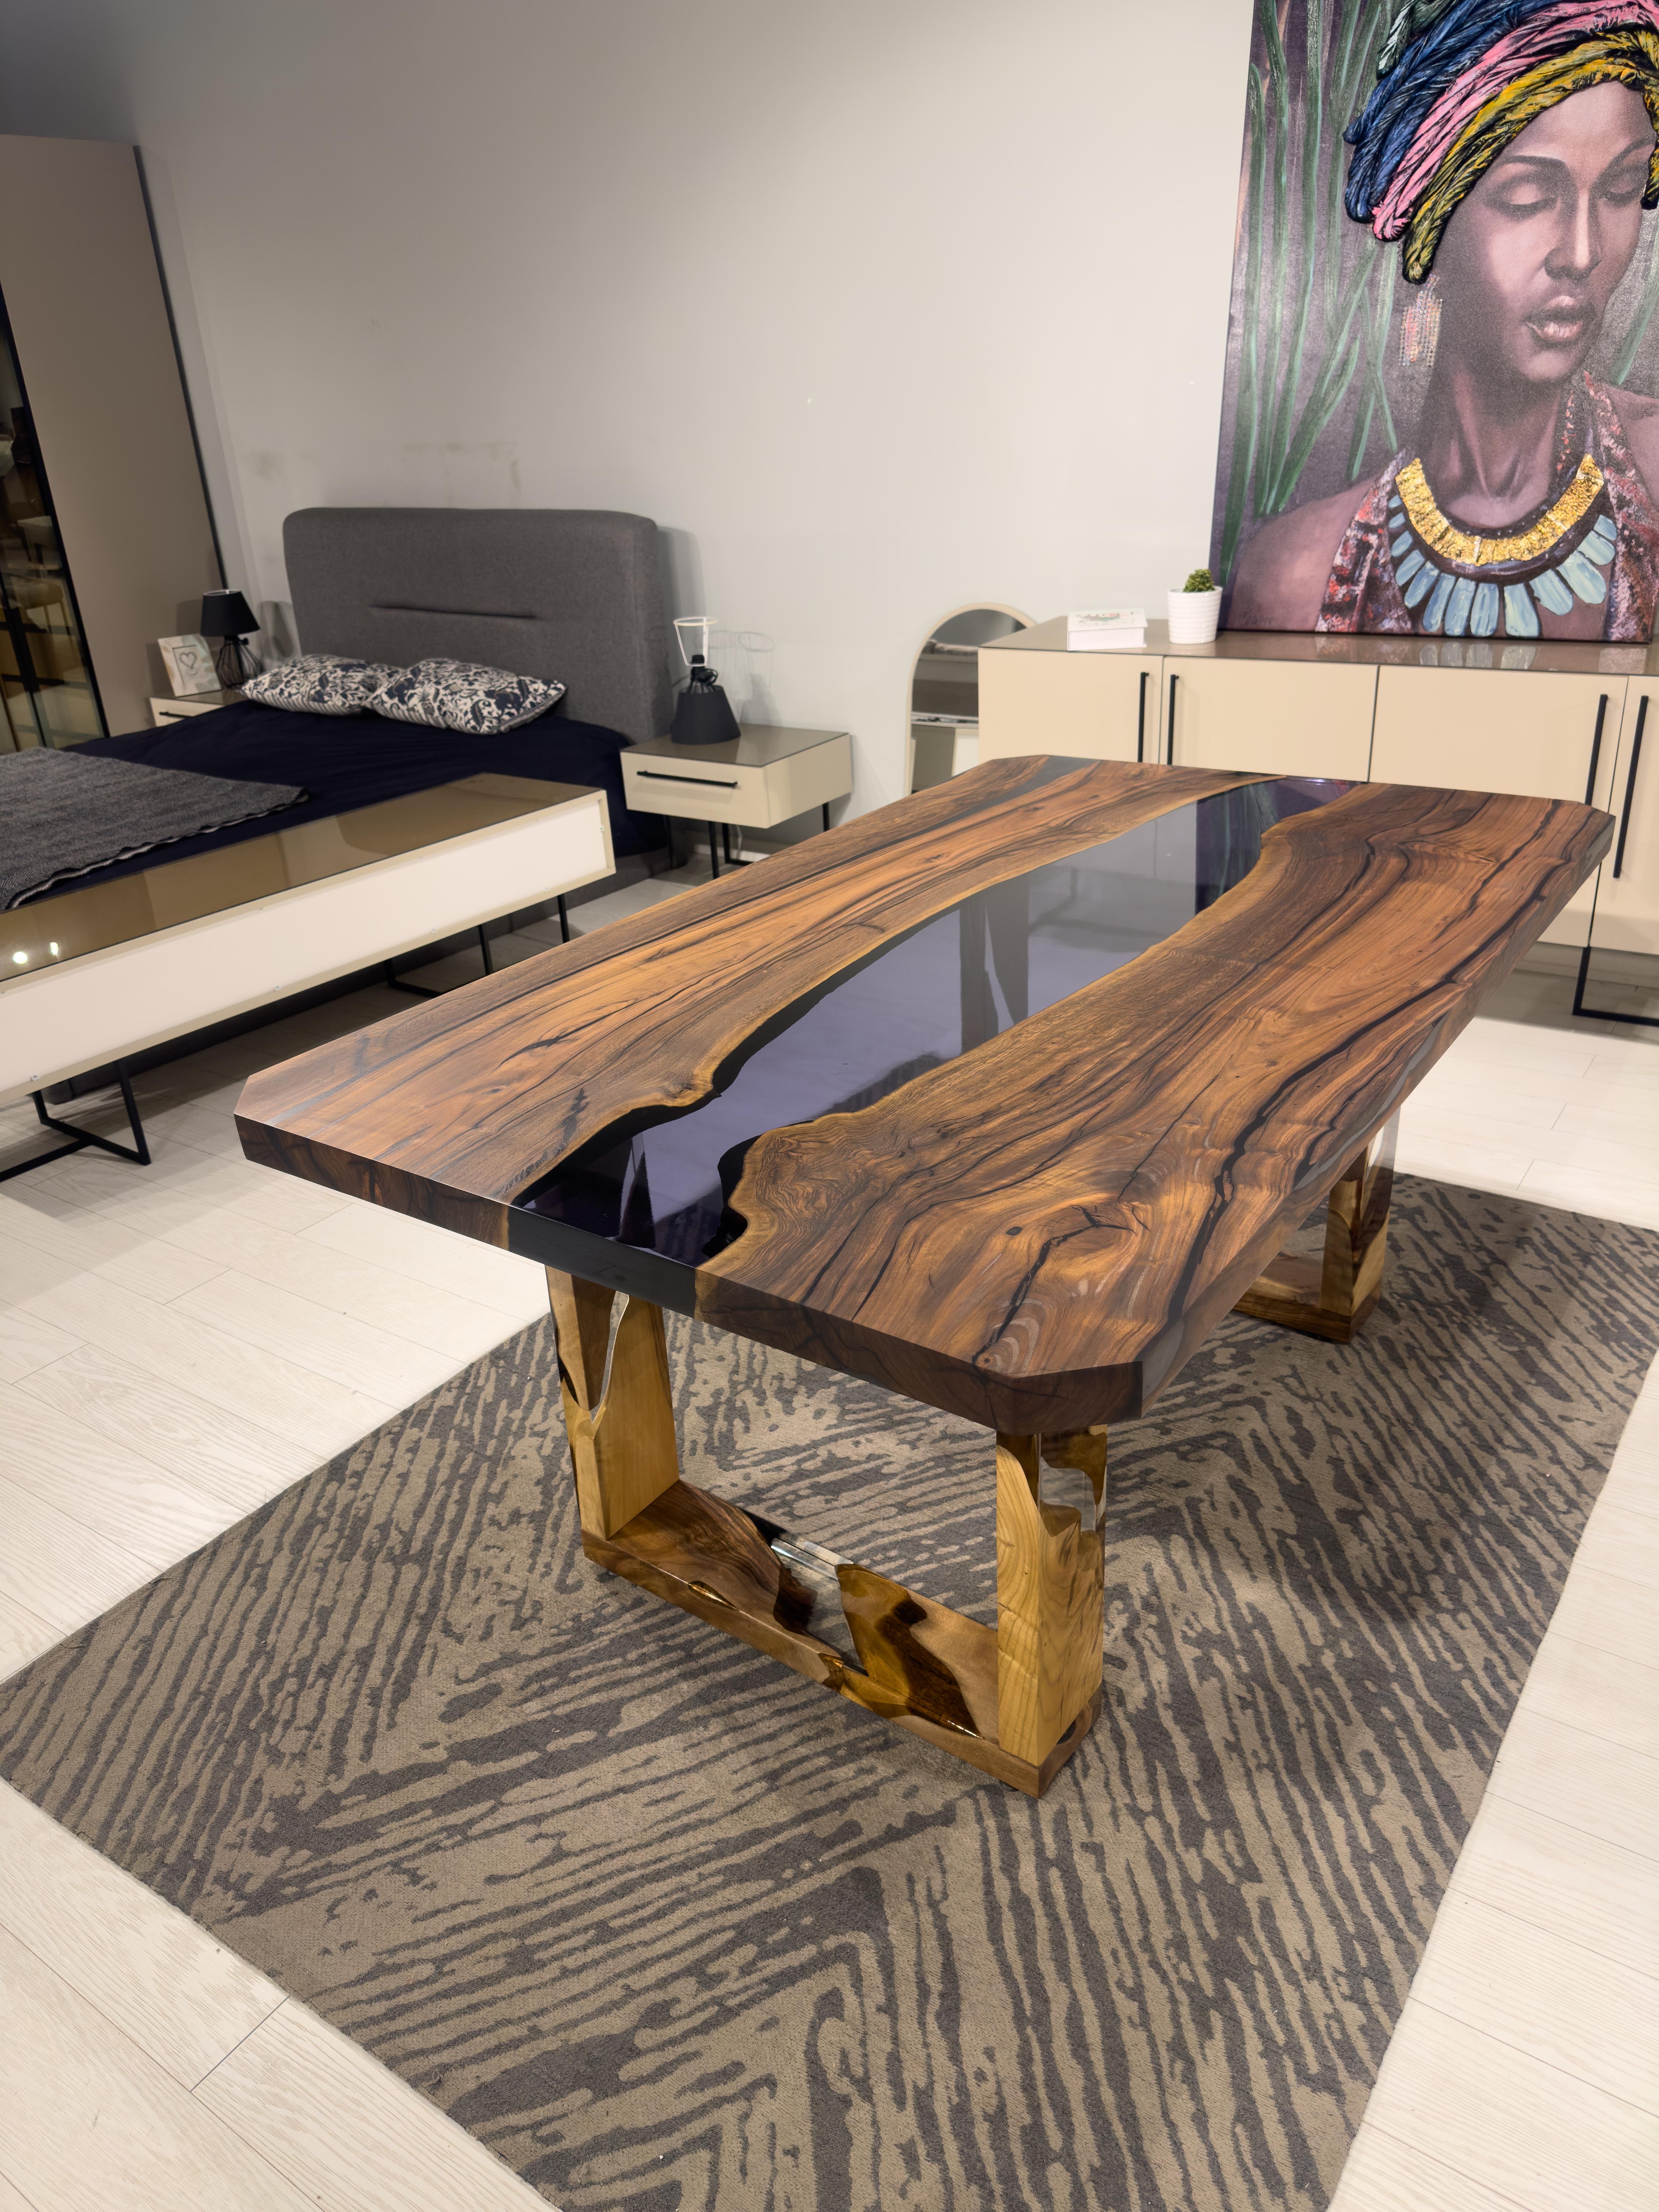 Walnut Wood and Black Transparent Epoxy Table - Custom sizes are available!

This table seamlessly combines the warmth of walnut wood with the modern touch of clear epoxy. It’s a beautiful centerpiece for any room.

Features:

Materials: The